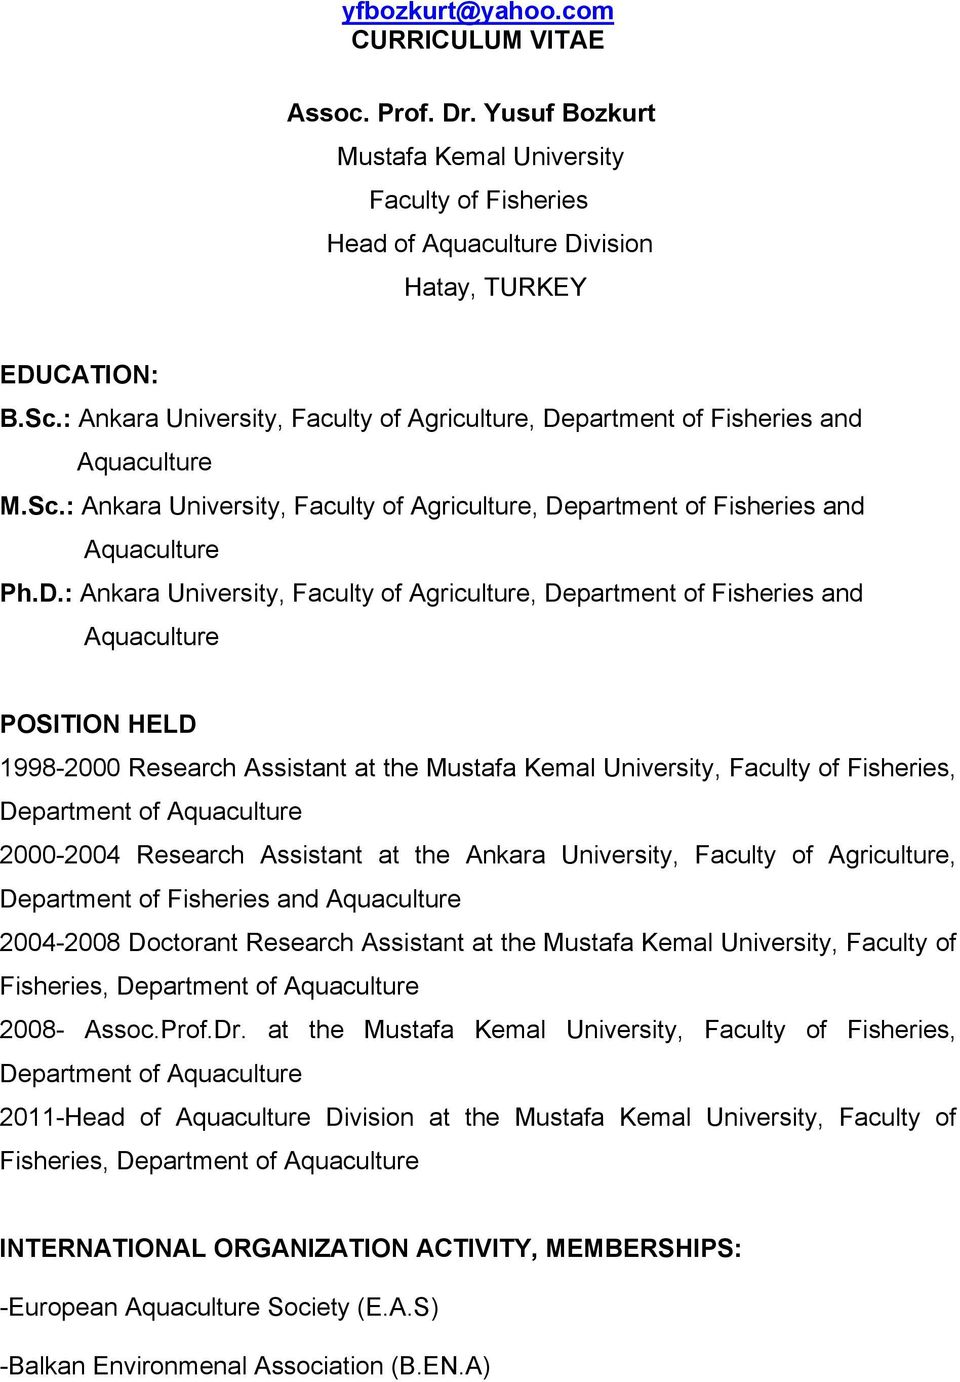 partment of Fisheries and Aquaculture M.Sc.partment of Fisheries and Aquaculture Ph.D.